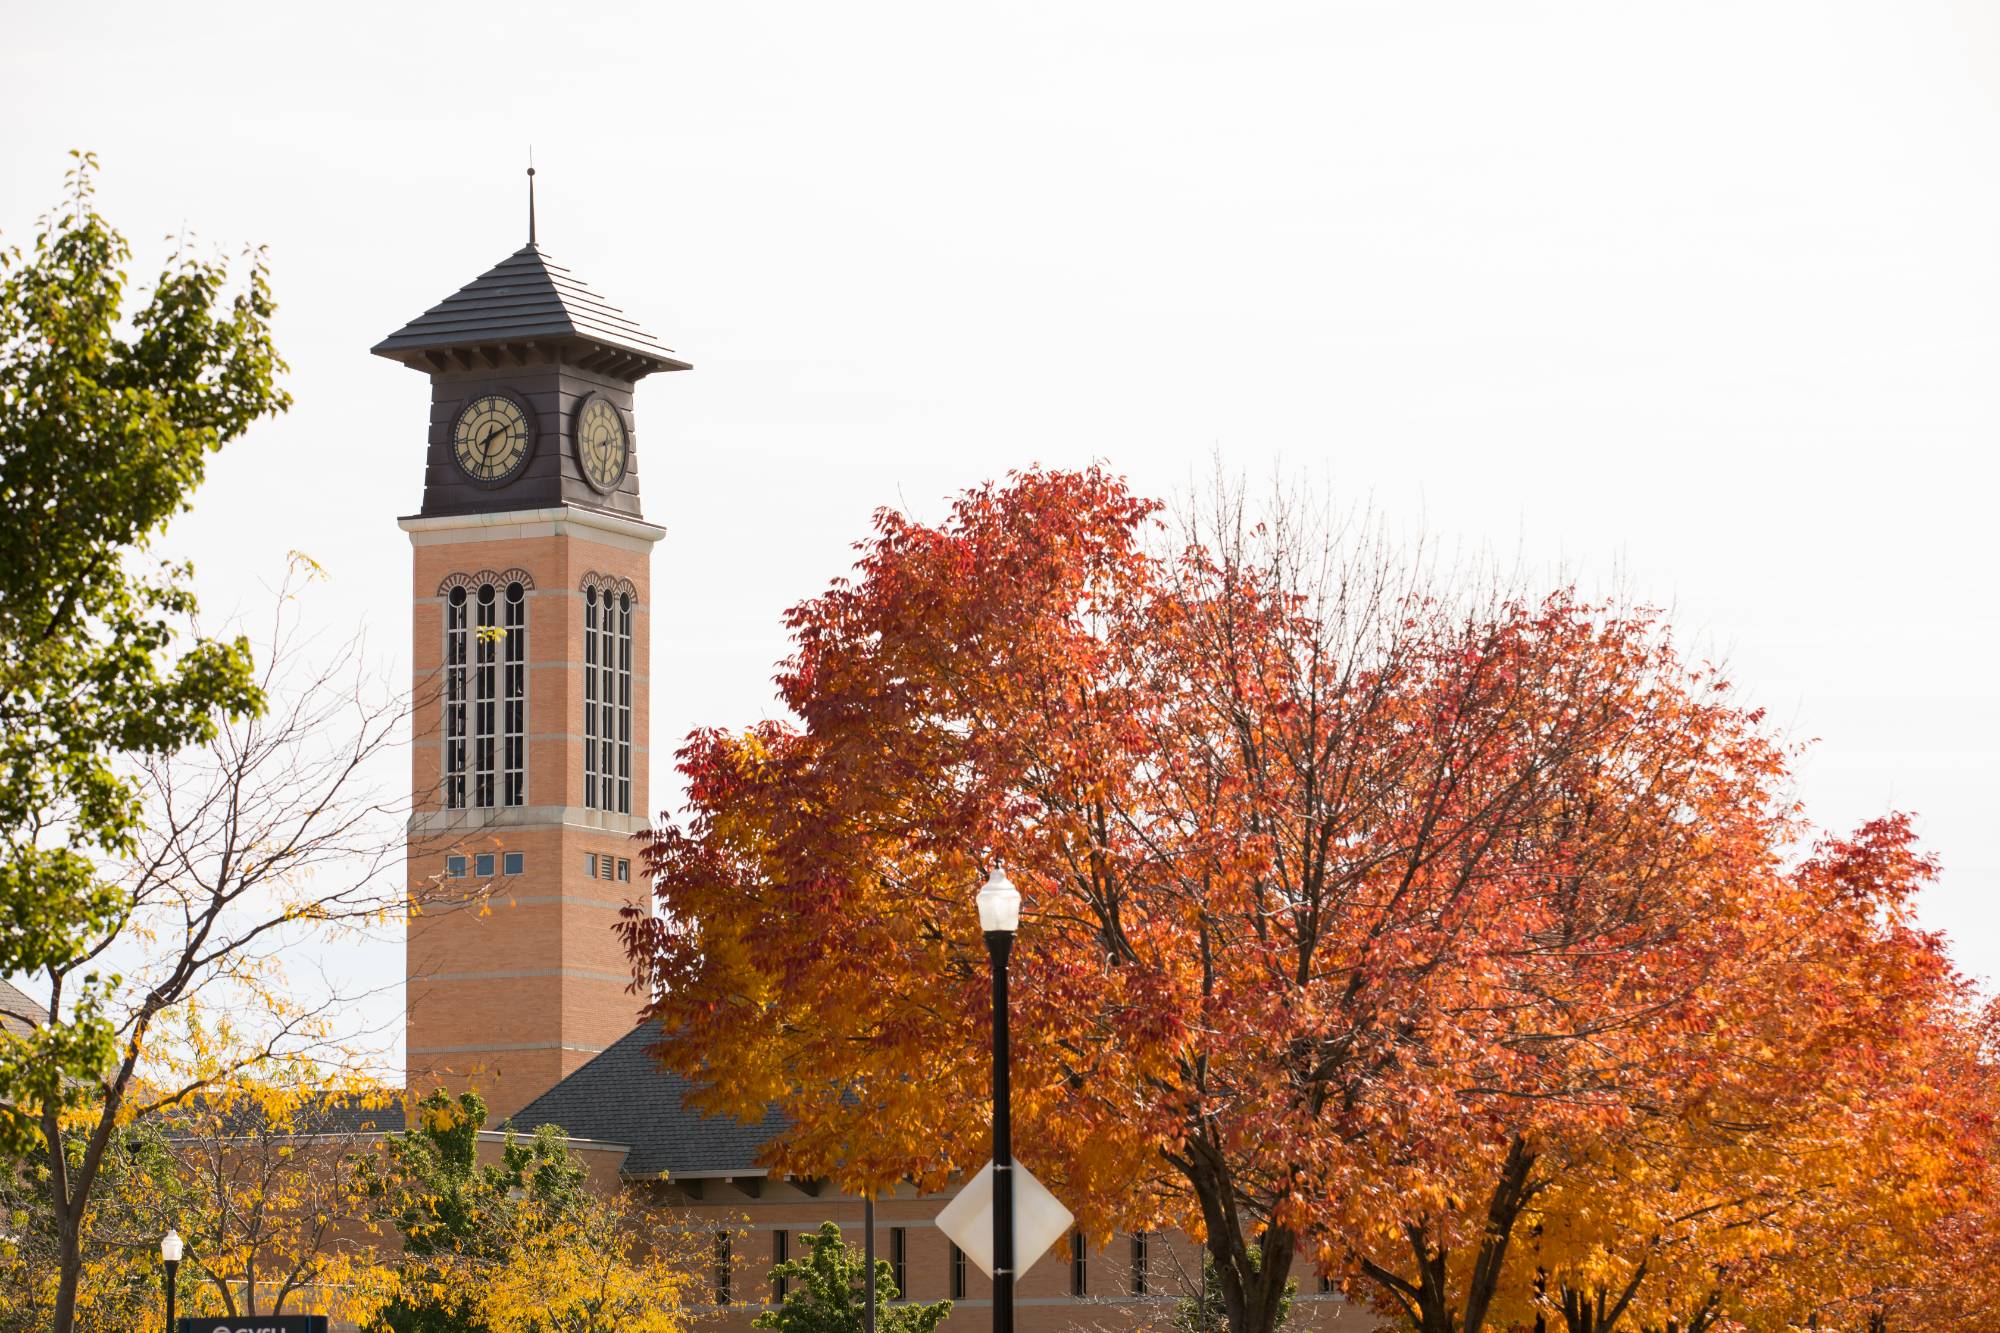 clocktower in the background with fall trees in the foreground